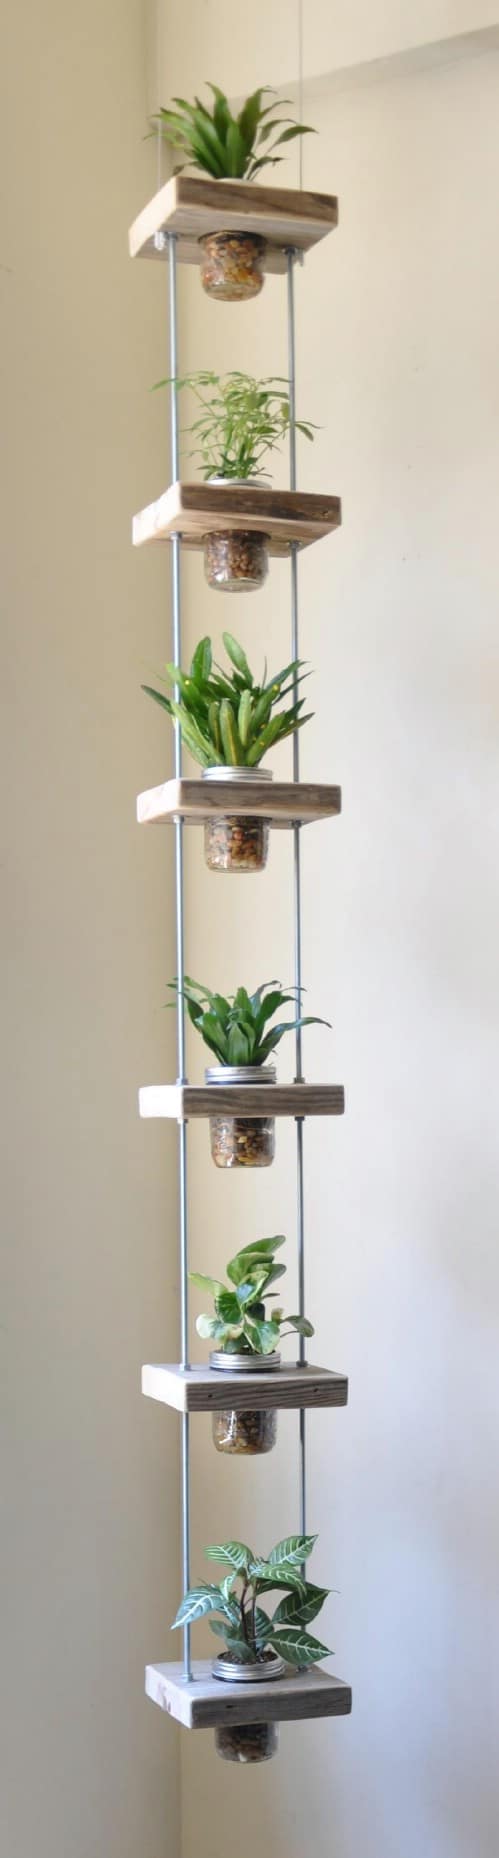 18 Brilliant And Creative Diy Herb Gardens For Indoors And Outdoors Diy Crafts